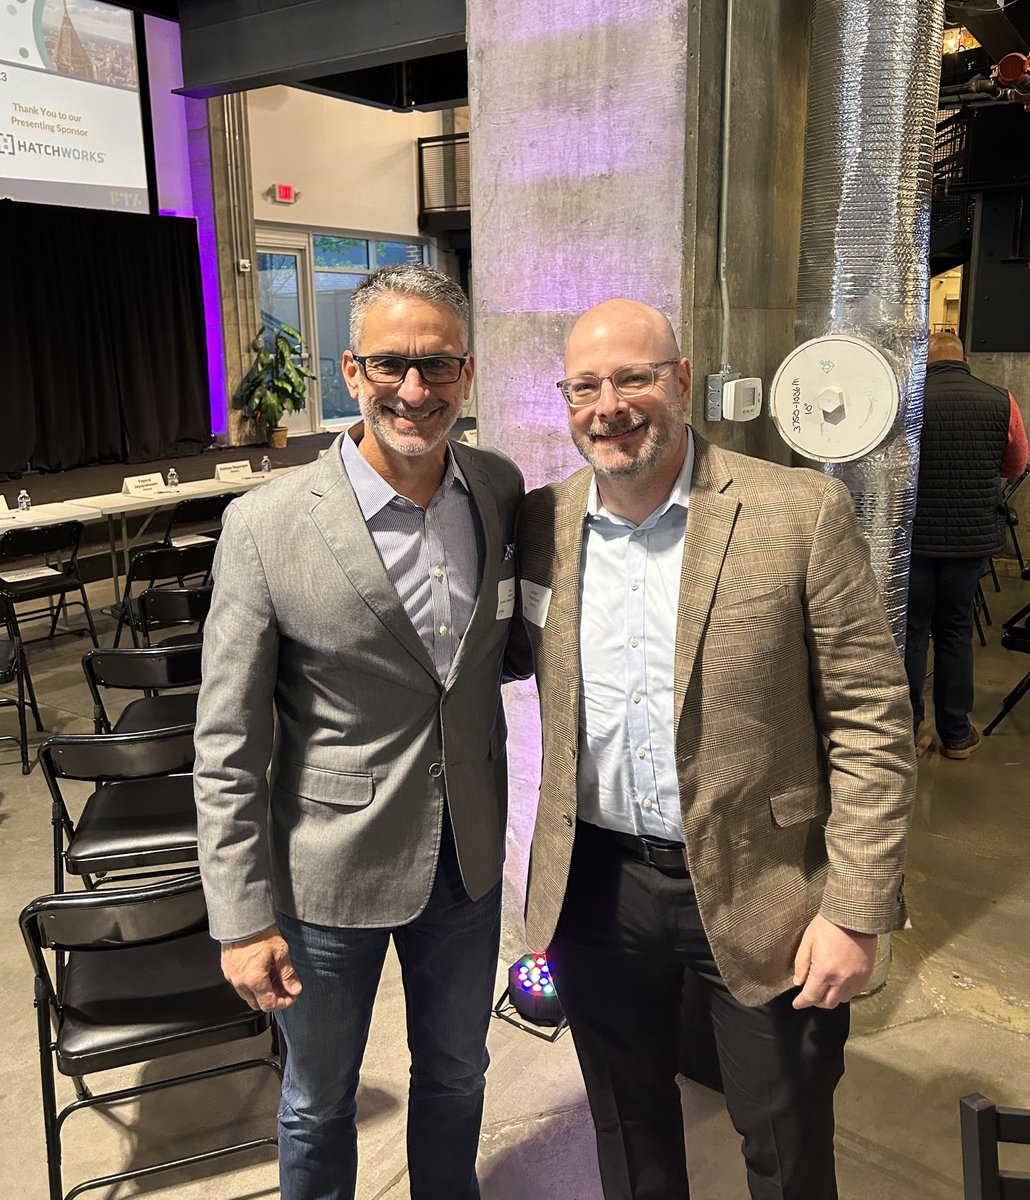 A gathering of industry leaders at FinTech Atlanta’s 'Run it by the Buyers' forum. Albert Bodine and Jordan Hirschfield had the pleasure of attending the event that fosters commercial collaboration between promising FinTech companies and large corporations. #fintech #commercial